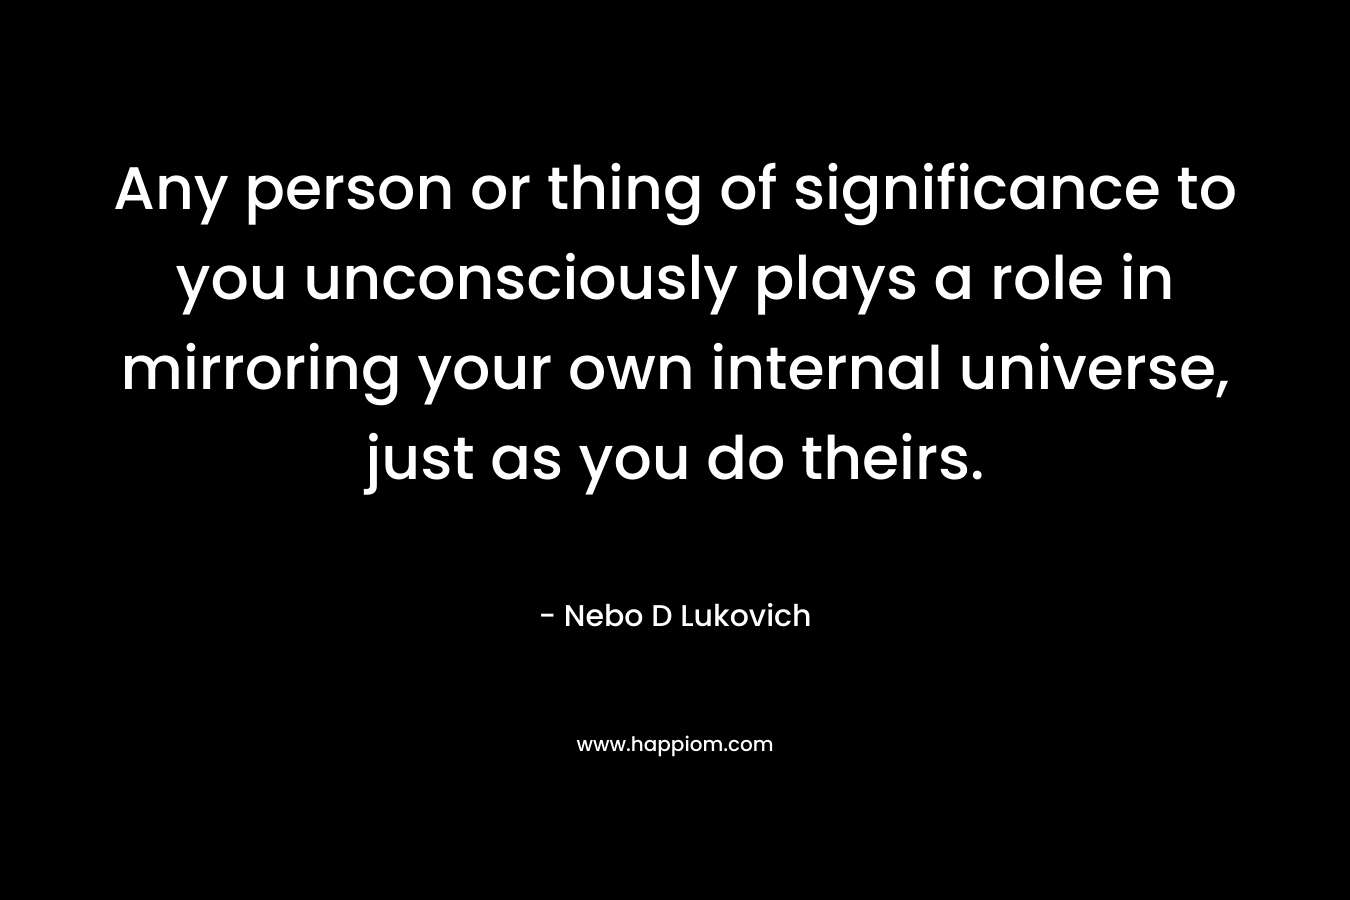 Any person or thing of significance to you unconsciously plays a role in mirroring your own internal universe, just as you do theirs.